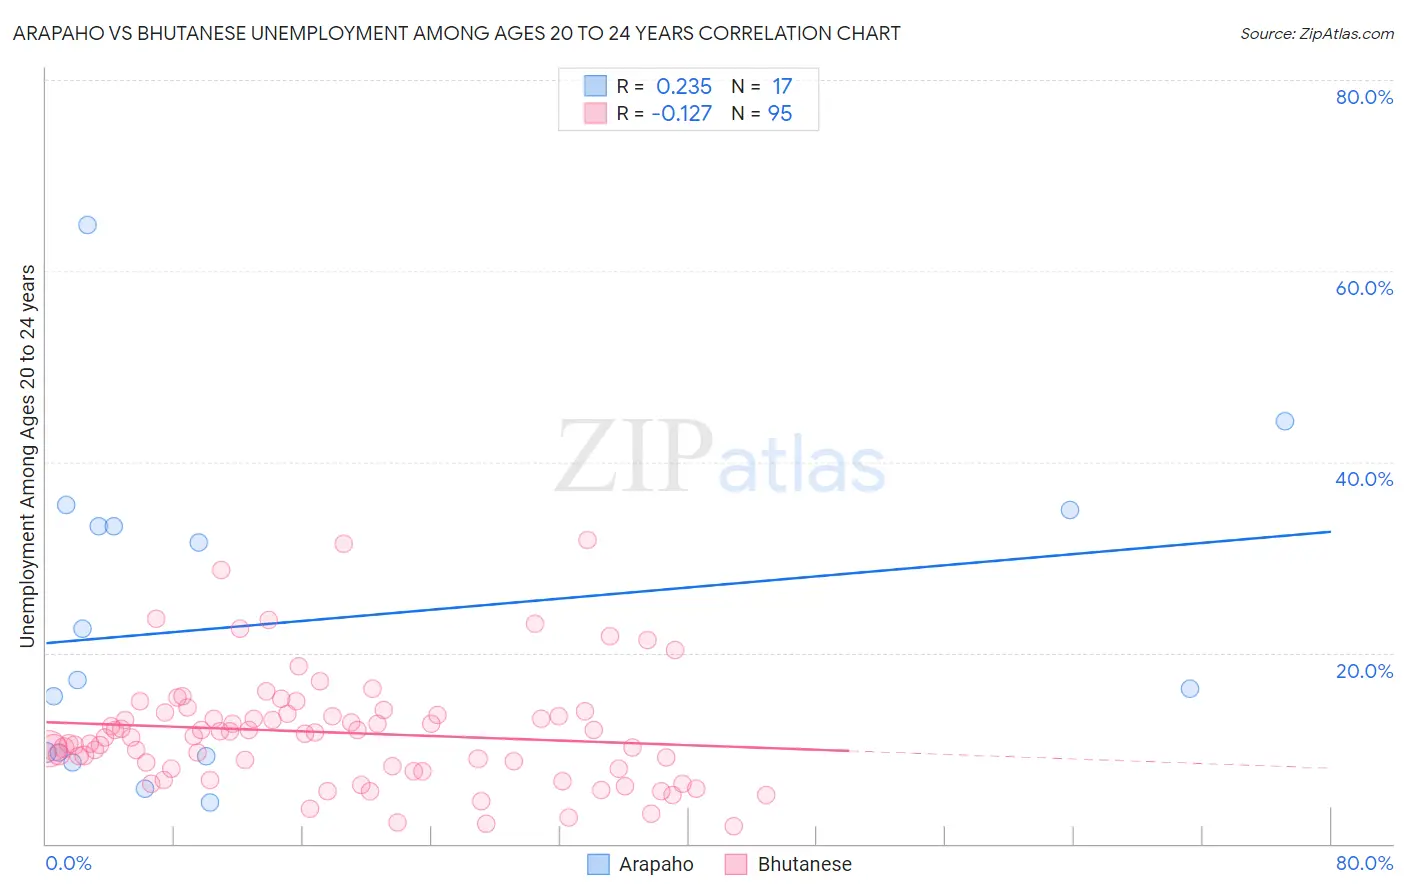 Arapaho vs Bhutanese Unemployment Among Ages 20 to 24 years